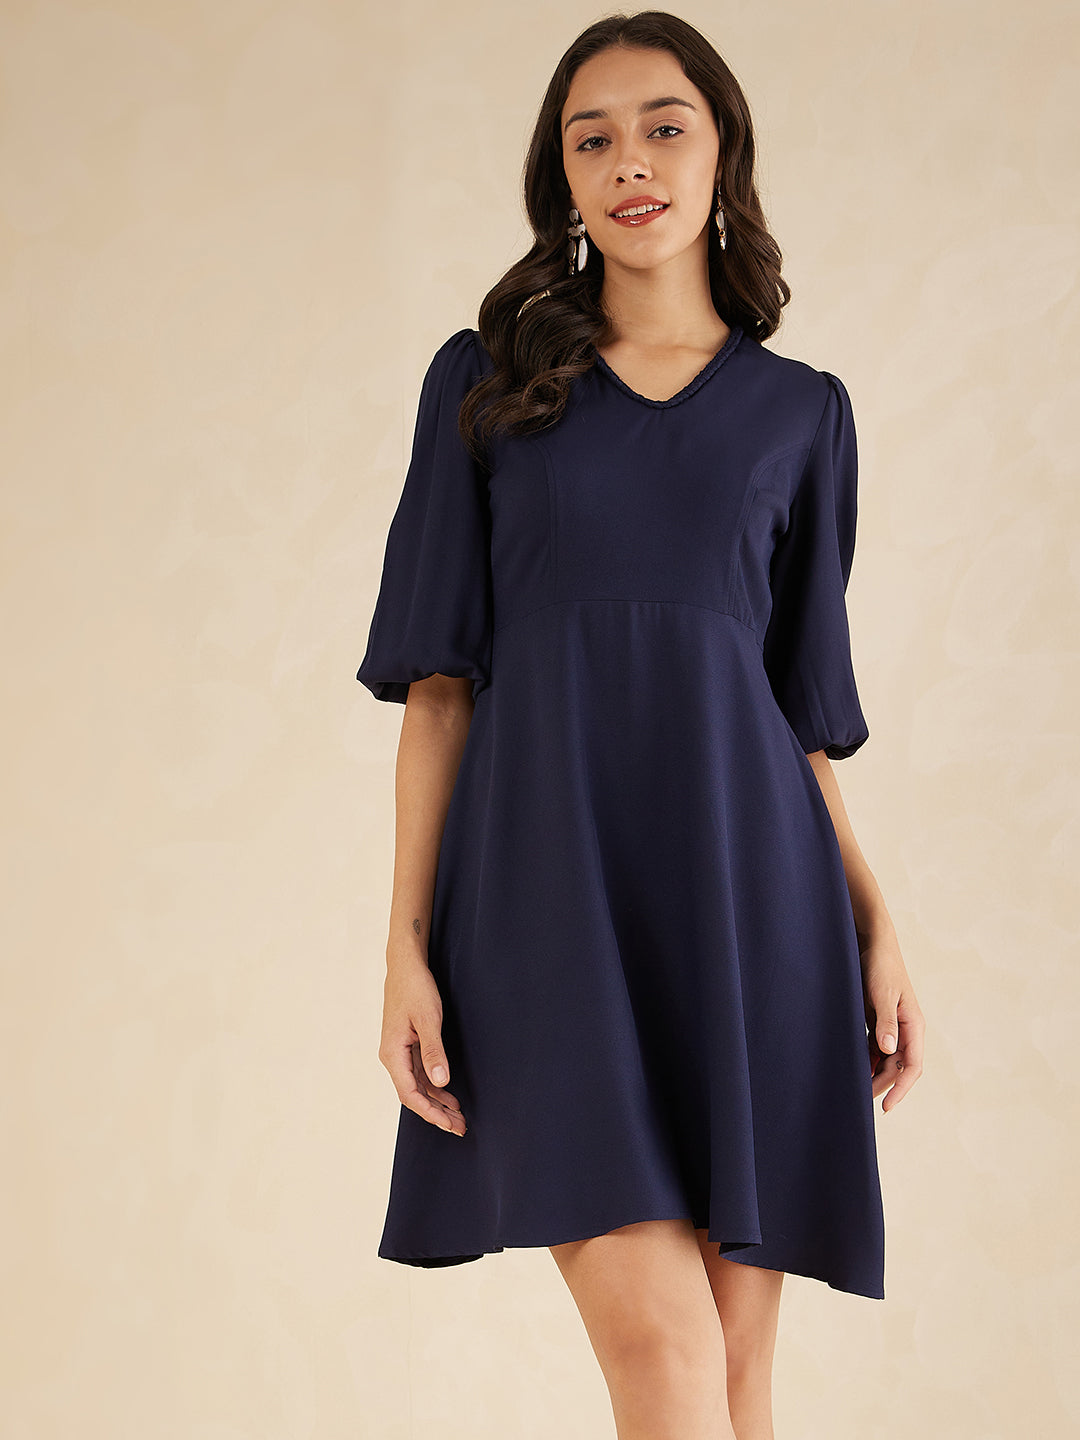 Navy Fit And Flare Knee Length Dress